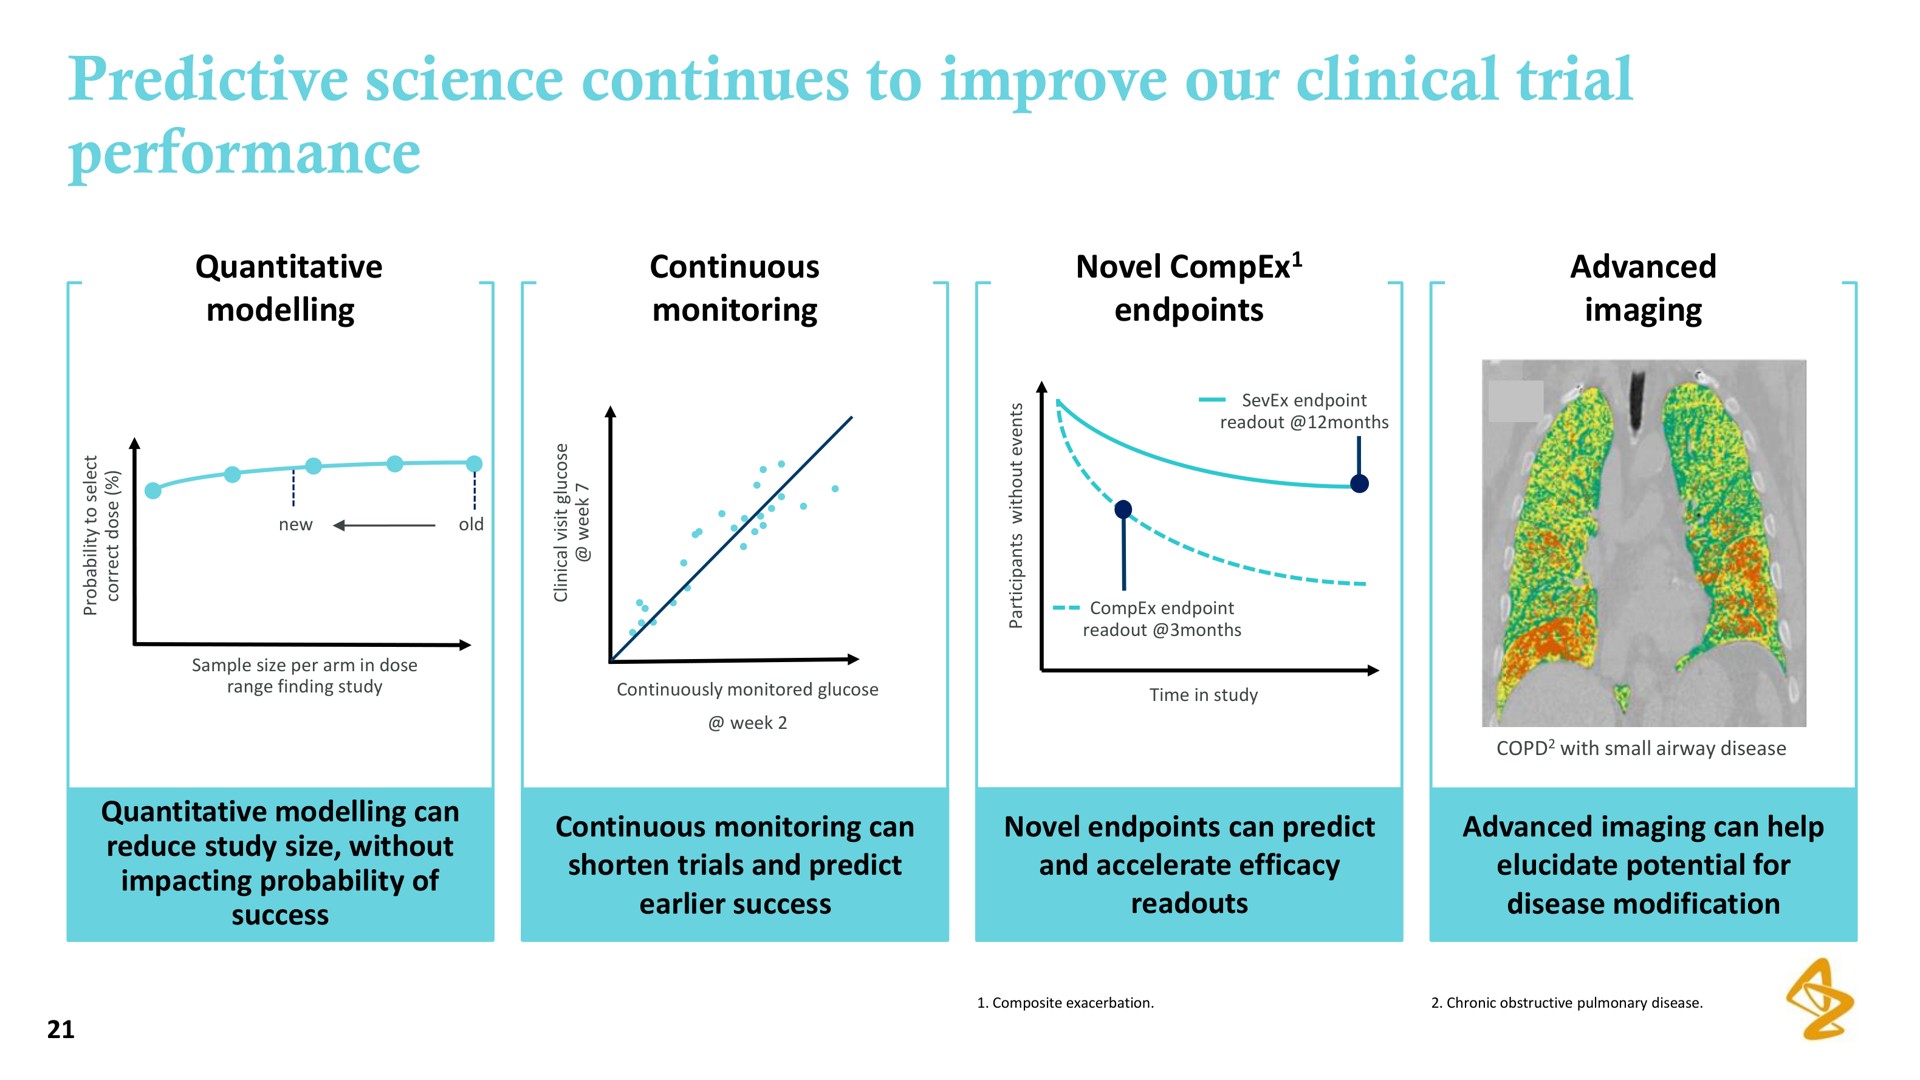 predictive science continues to improve our clinical trial performance | AstraZeneca